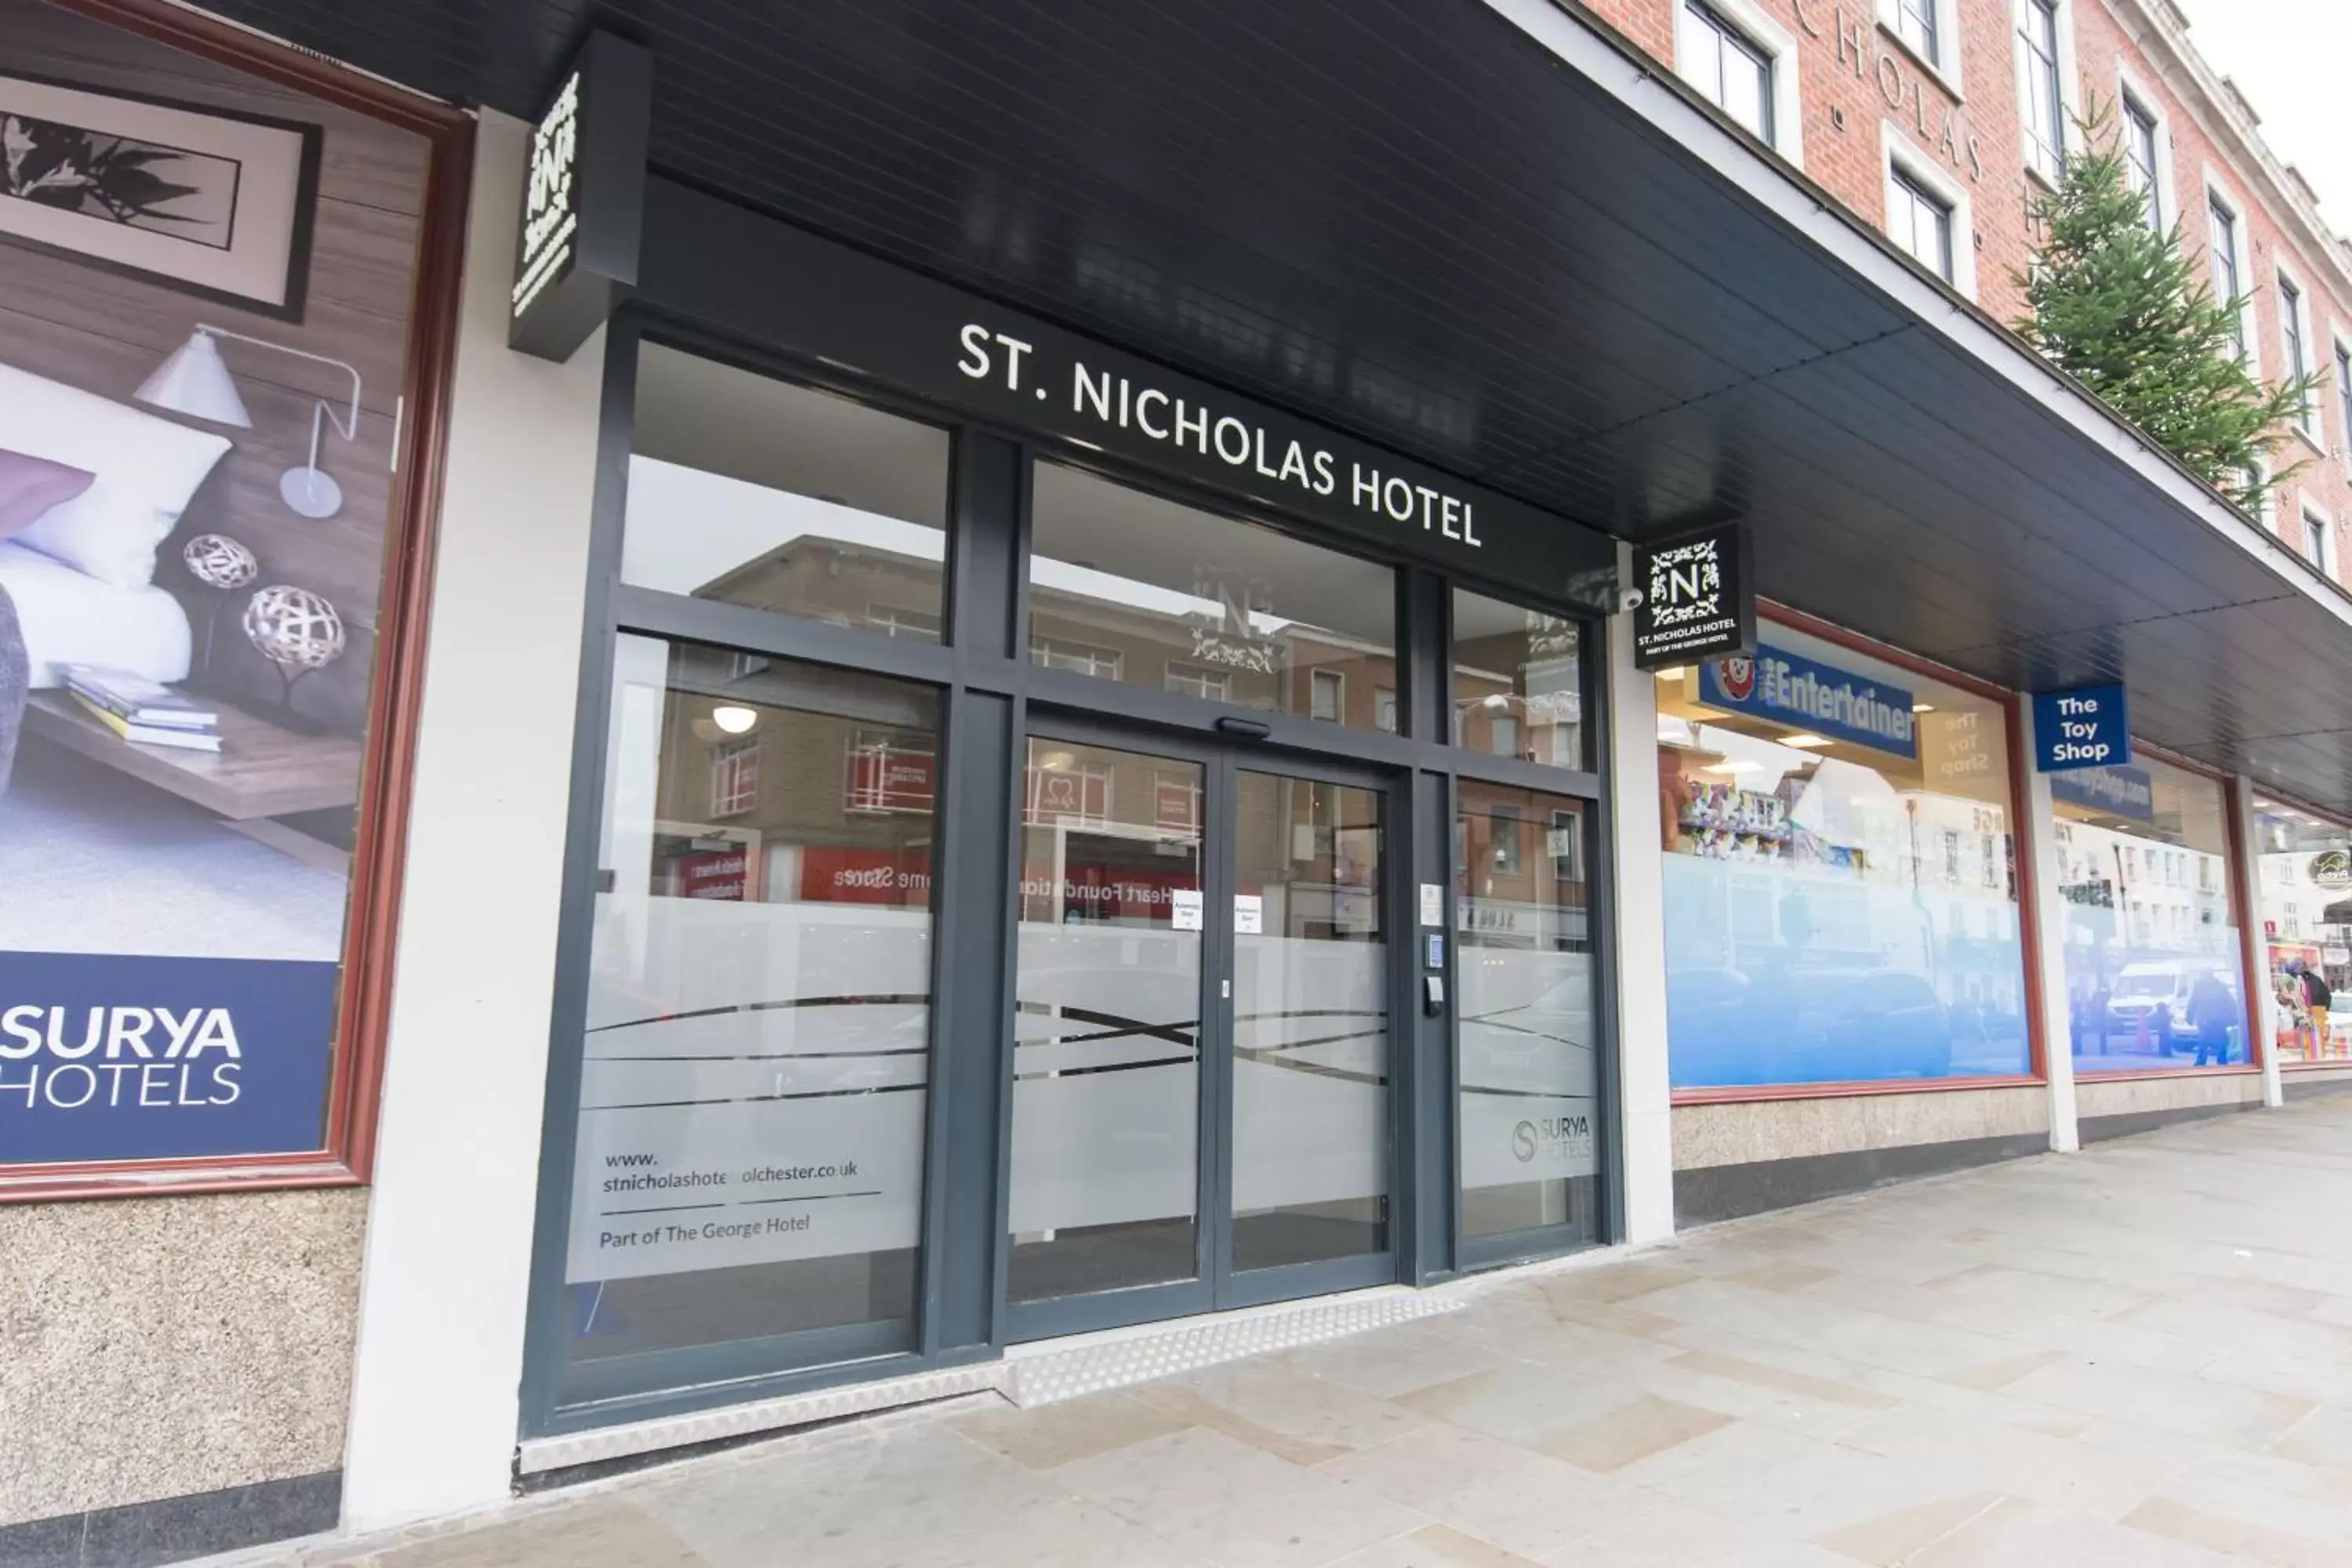 Property building in St Nicholas Hotel